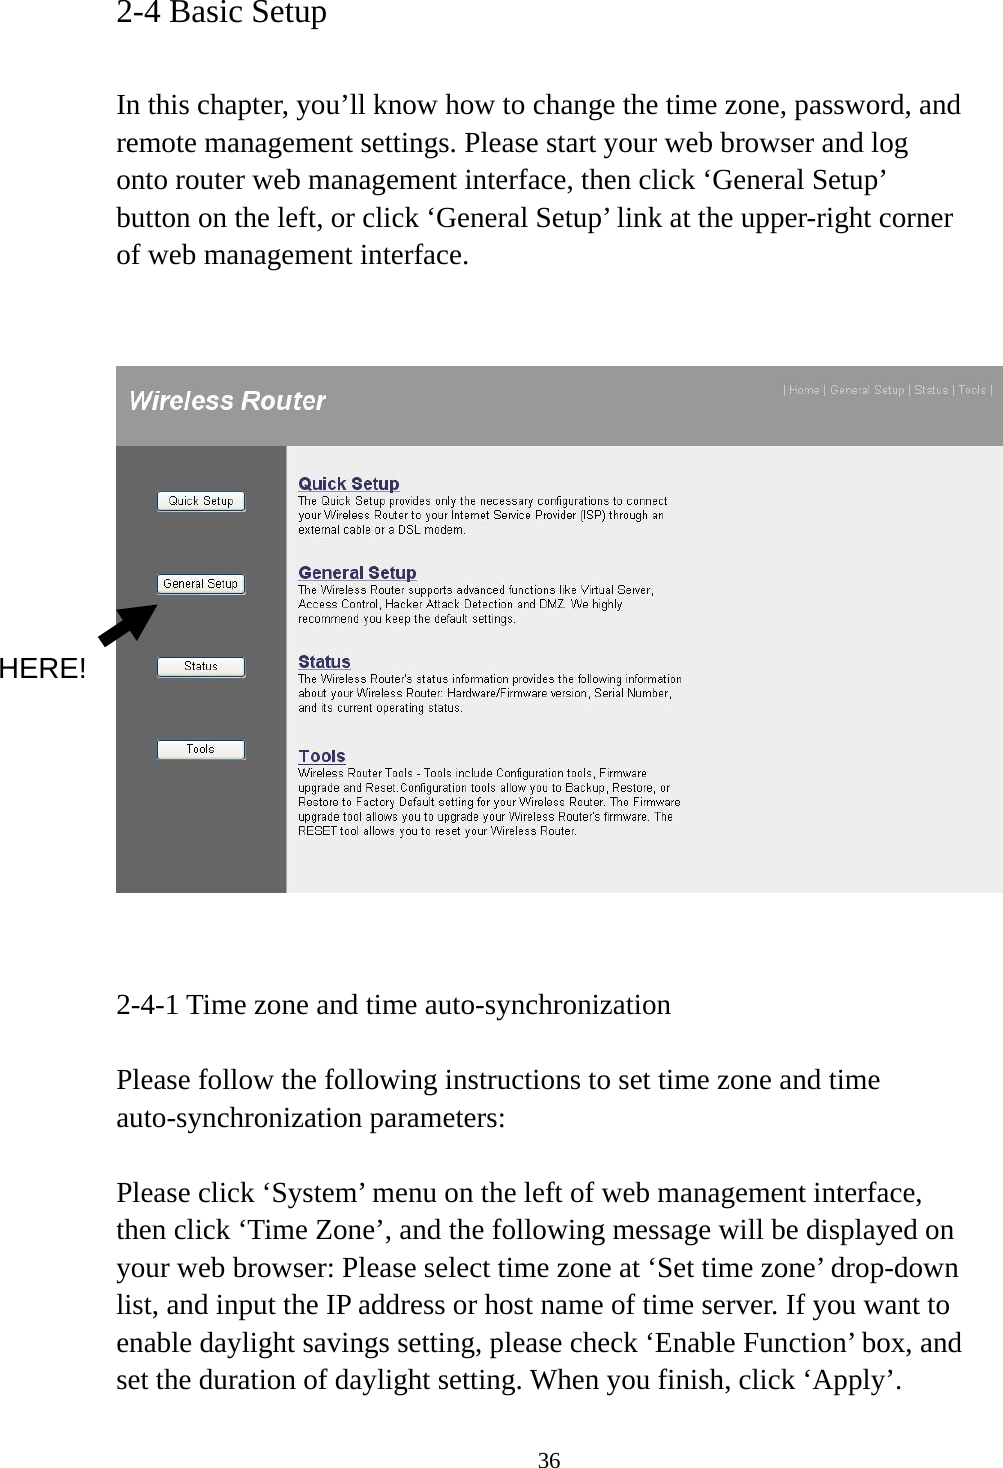 36 2-4 Basic Setup  In this chapter, you’ll know how to change the time zone, password, and remote management settings. Please start your web browser and log onto router web management interface, then click ‘General Setup’ button on the left, or click ‘General Setup’ link at the upper-right corner of web management interface.      2-4-1 Time zone and time auto-synchronization  Please follow the following instructions to set time zone and time auto-synchronization parameters:  Please click ‘System’ menu on the left of web management interface, then click ‘Time Zone’, and the following message will be displayed on your web browser: Please select time zone at ‘Set time zone’ drop-down list, and input the IP address or host name of time server. If you want to enable daylight savings setting, please check ‘Enable Function’ box, and set the duration of daylight setting. When you finish, click ‘Apply’. HERE! 